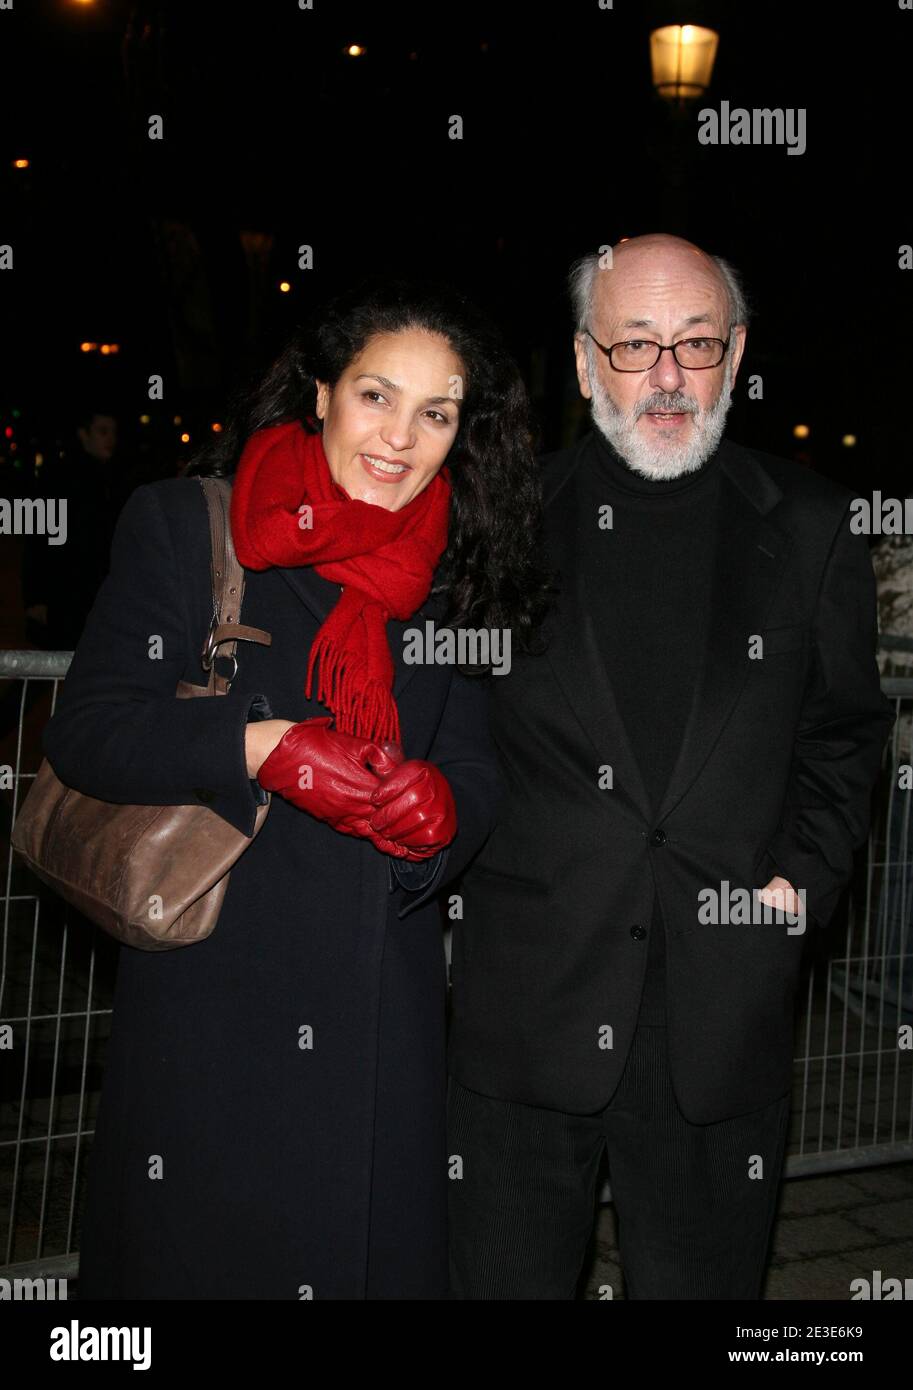 Bertrand Blier arriving at the premiere of 'Le Bal Des Actrices' held at Publicis cinema in Paris, France on January 19, 2009. Photo by Denis Guignebourg/ABACAPRESS.COM Stock Photo